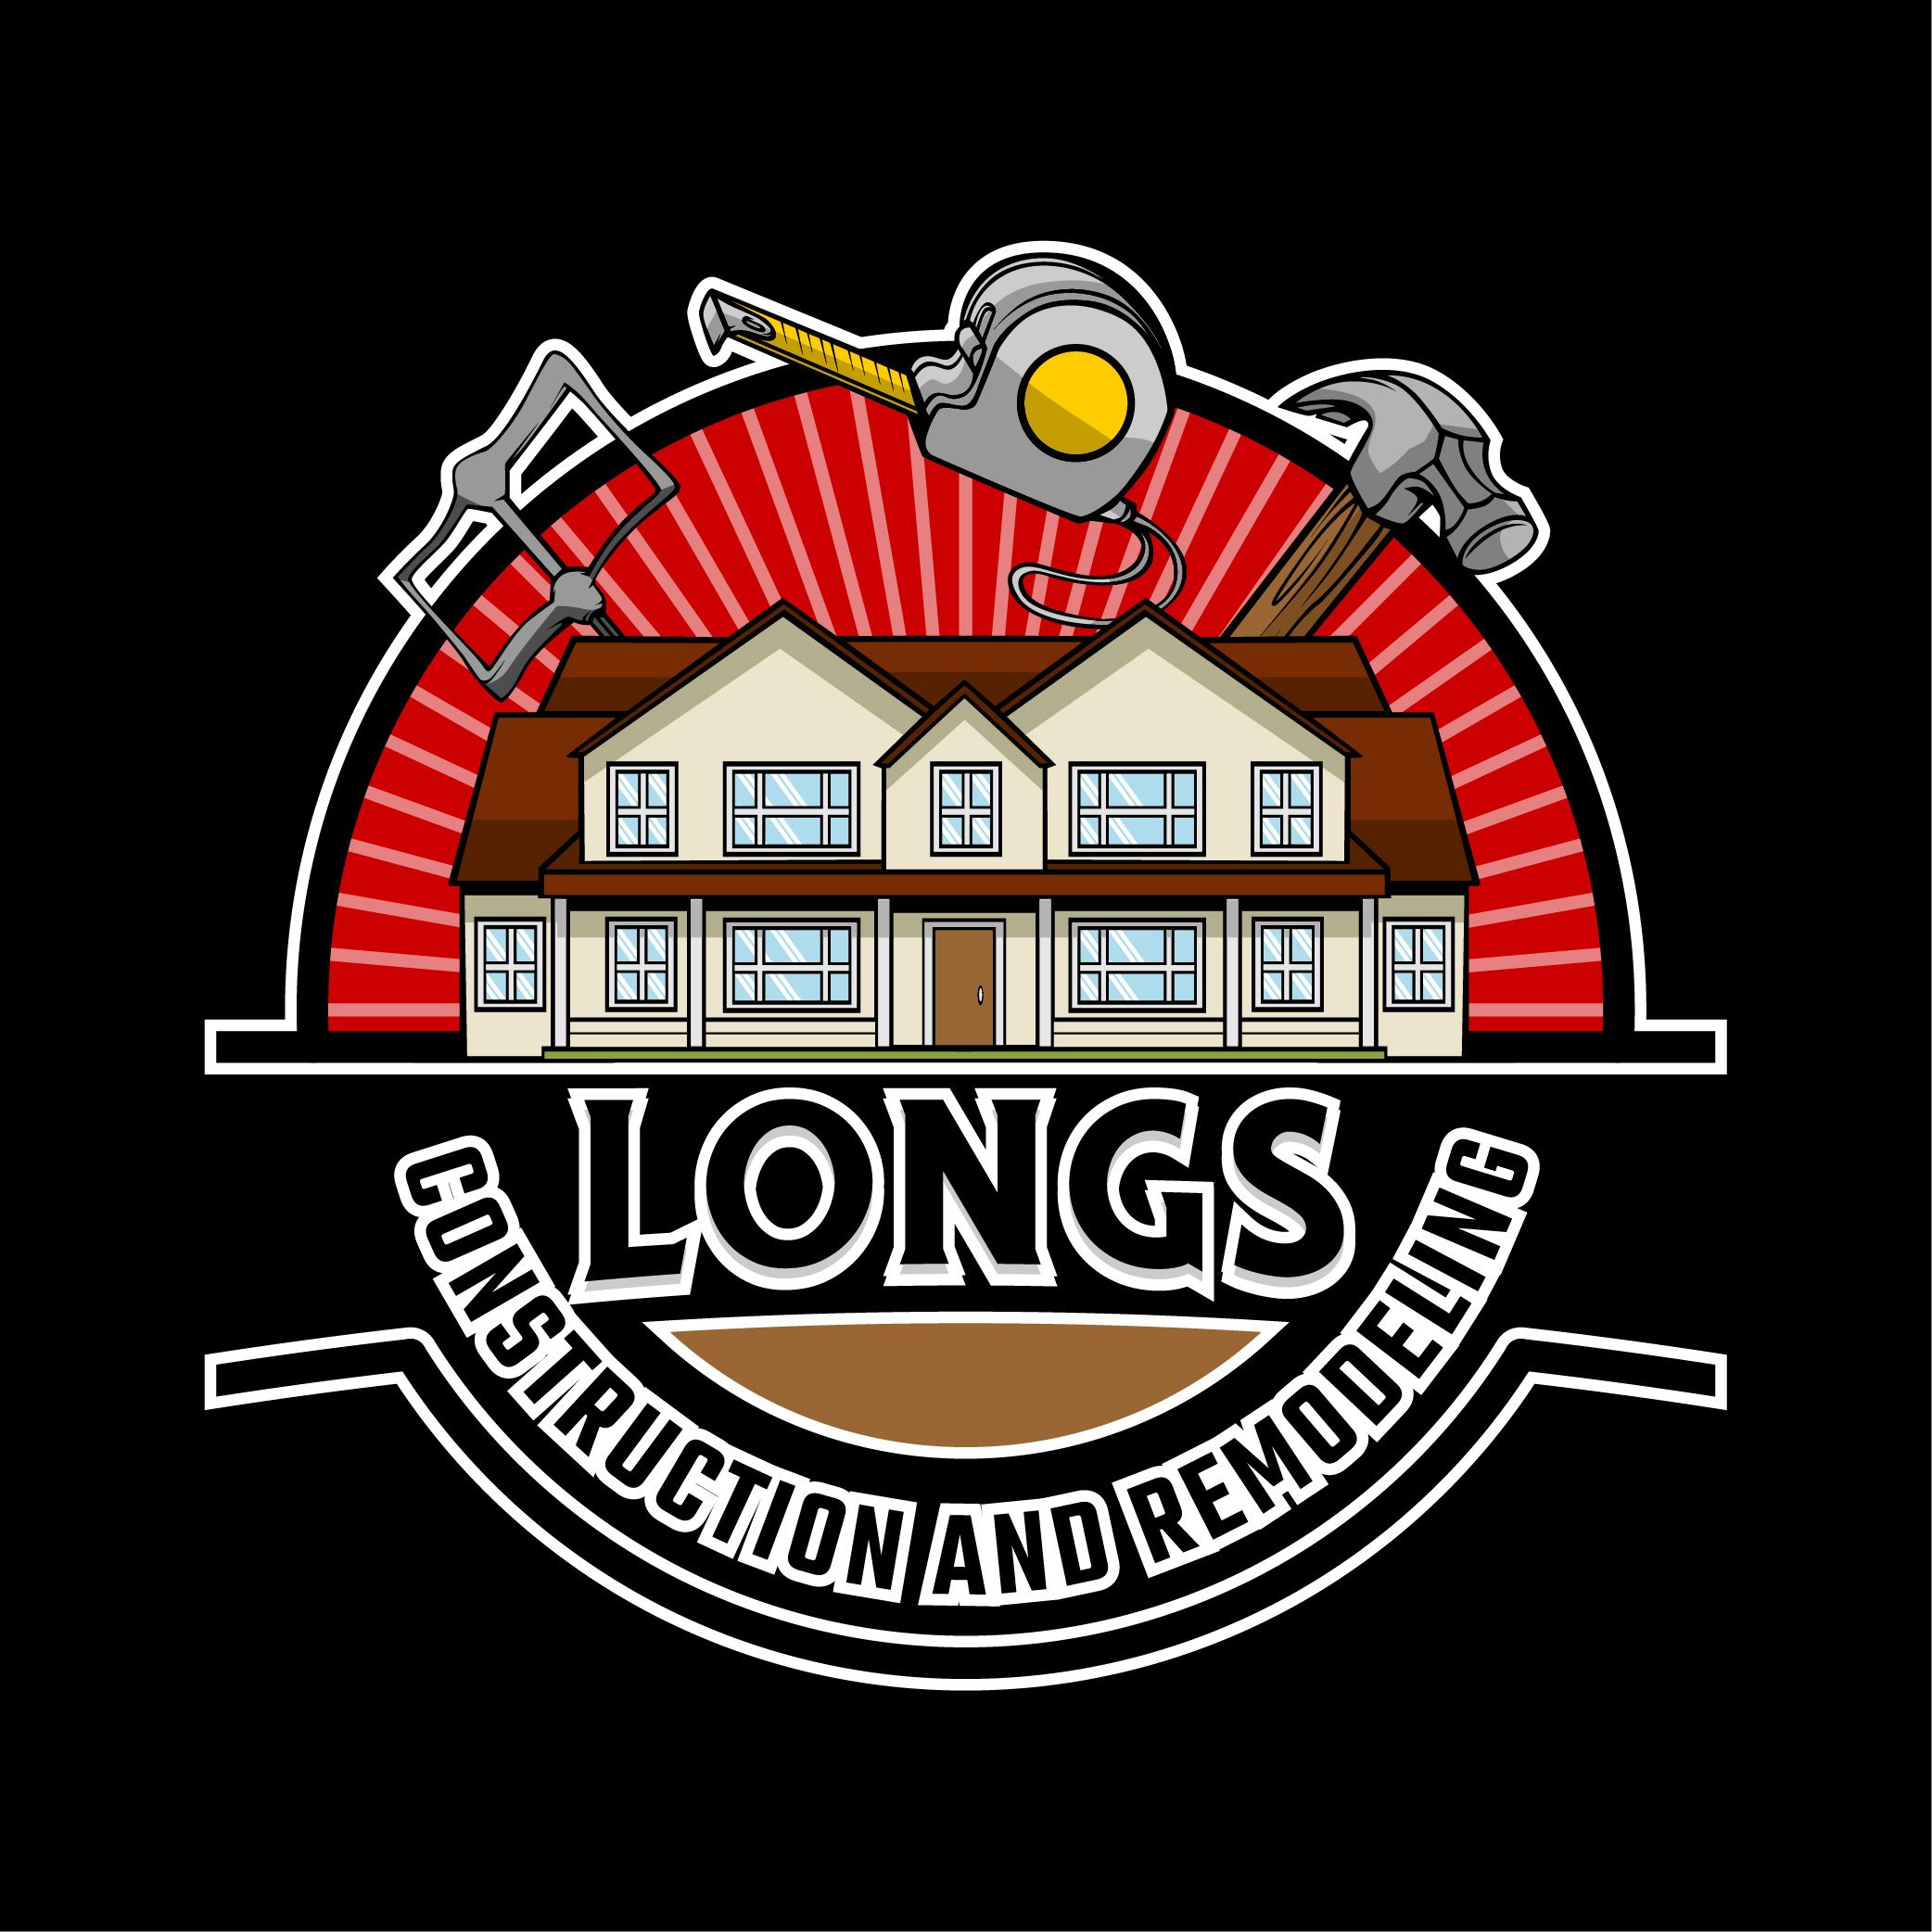 Longs Construction and Remodeling Logo